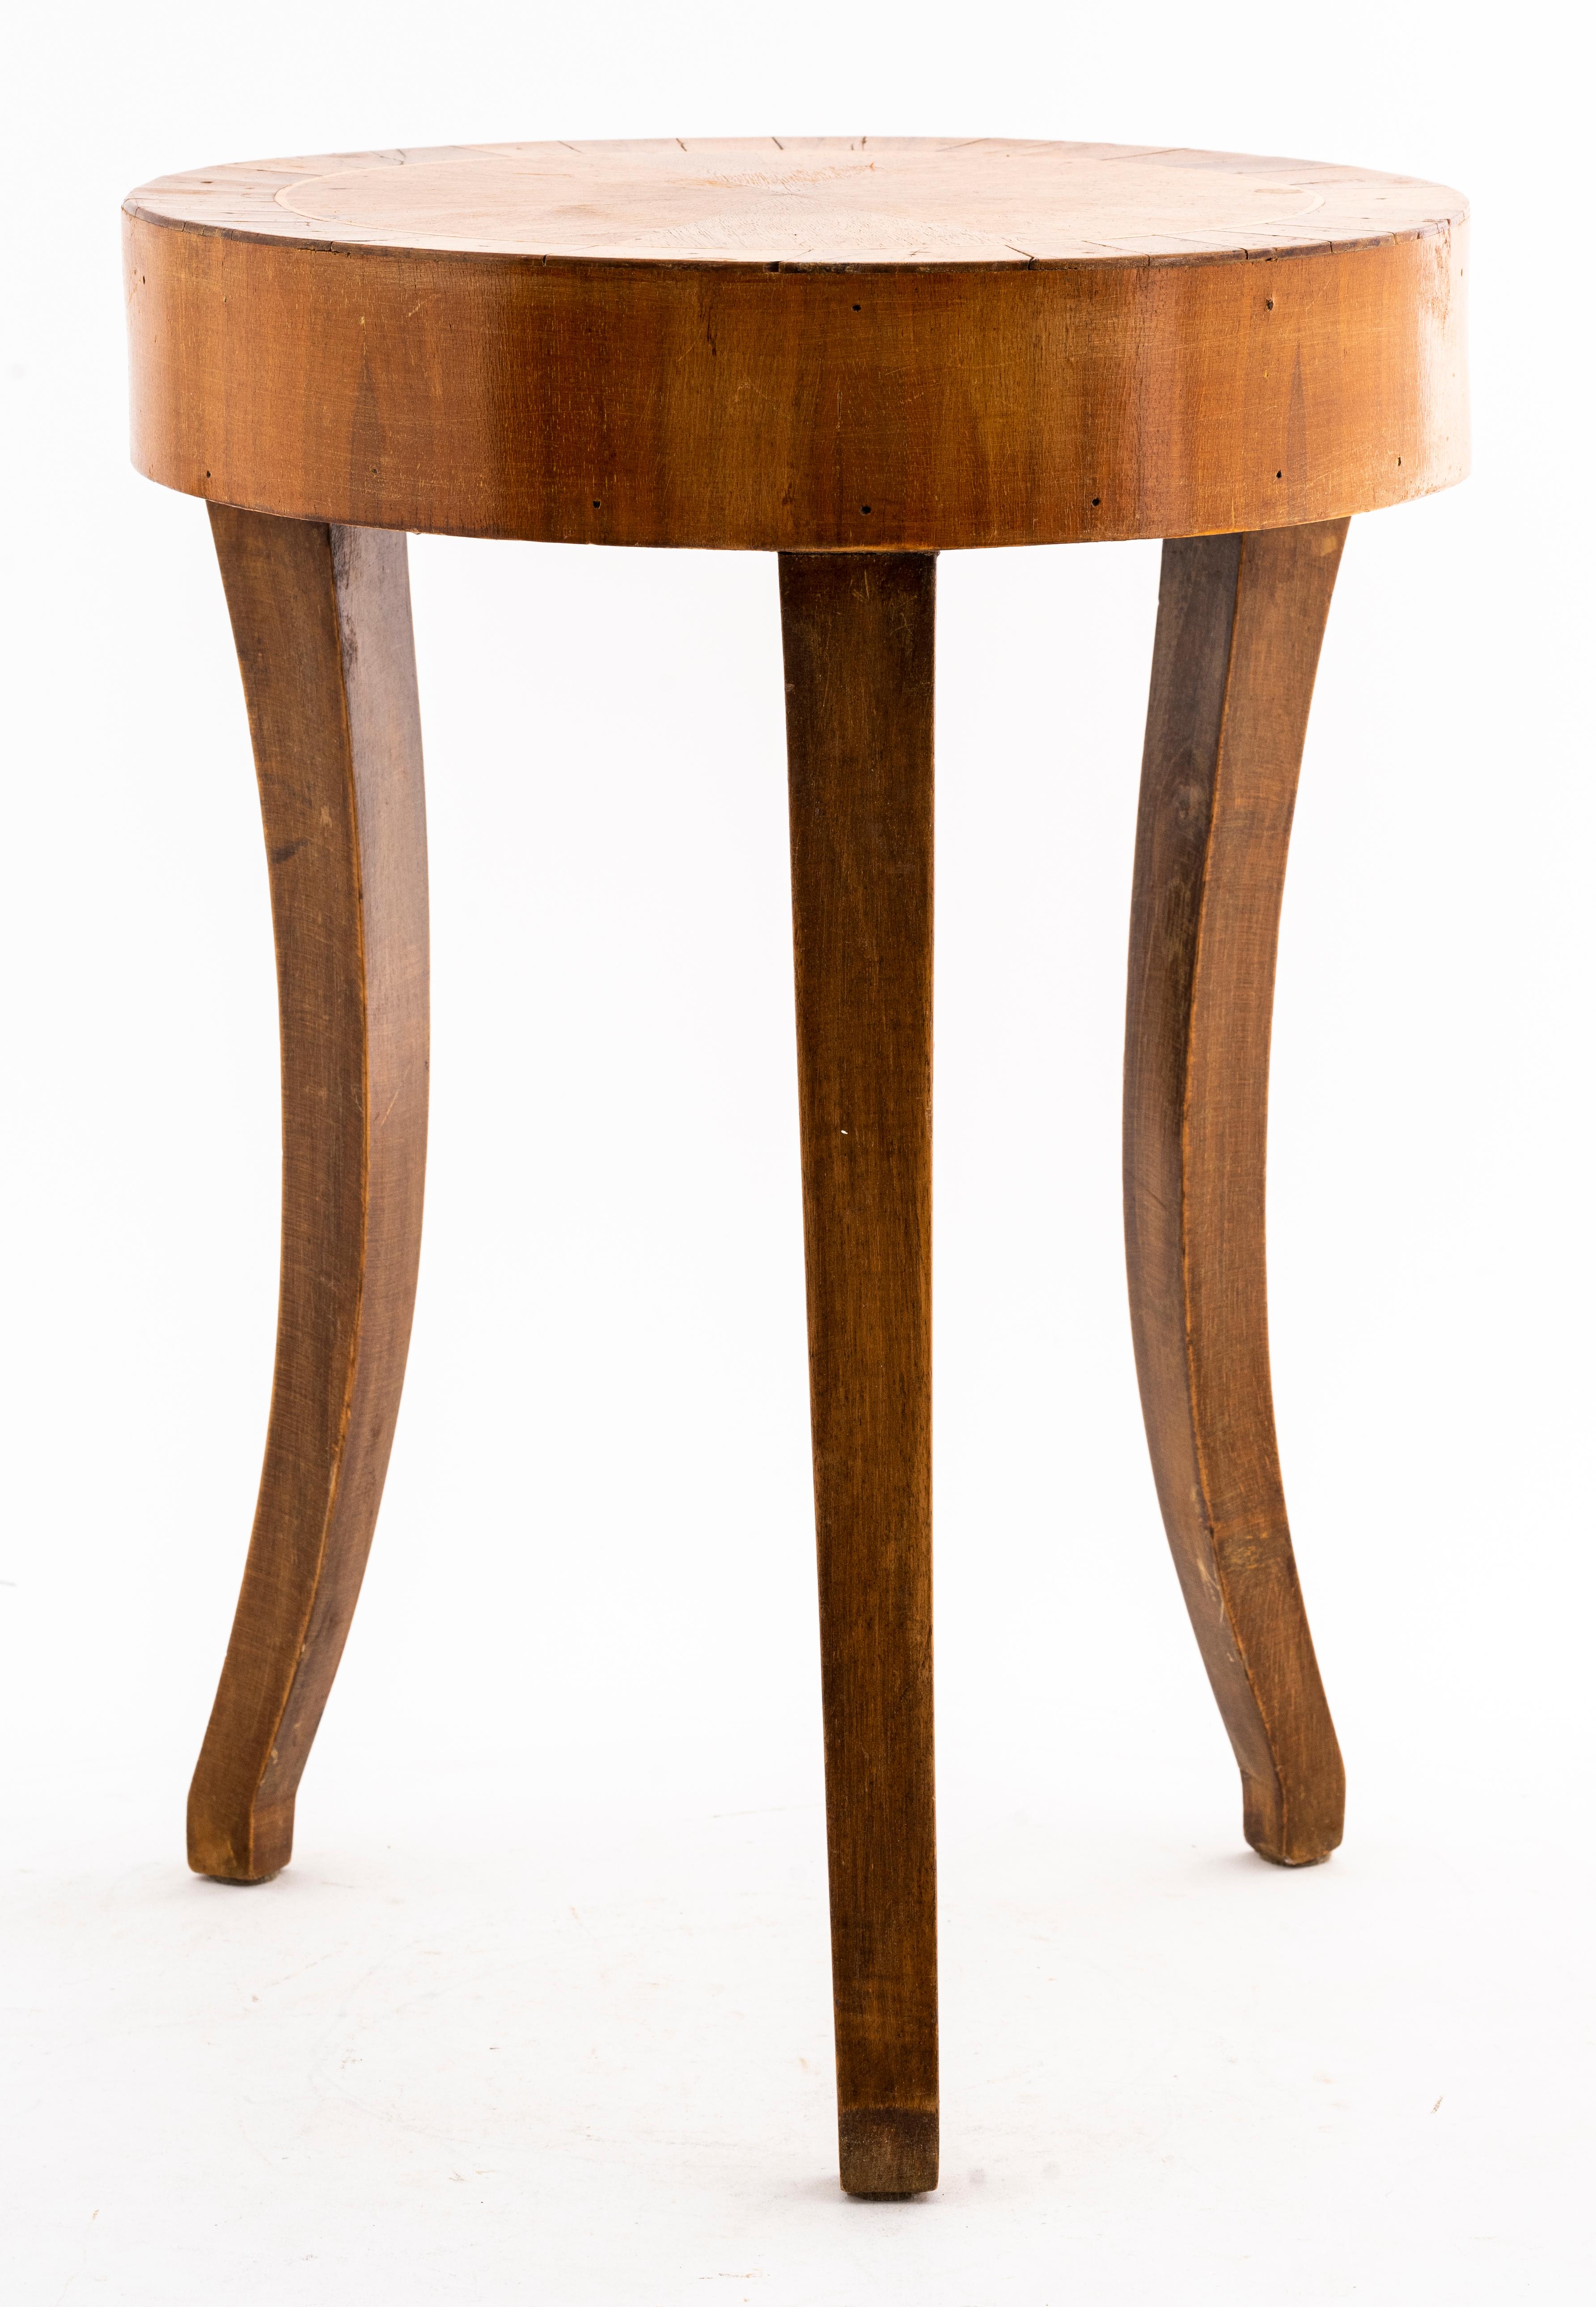 Diminutive round side table with inlay top and three legs. 
Dimensions: 17